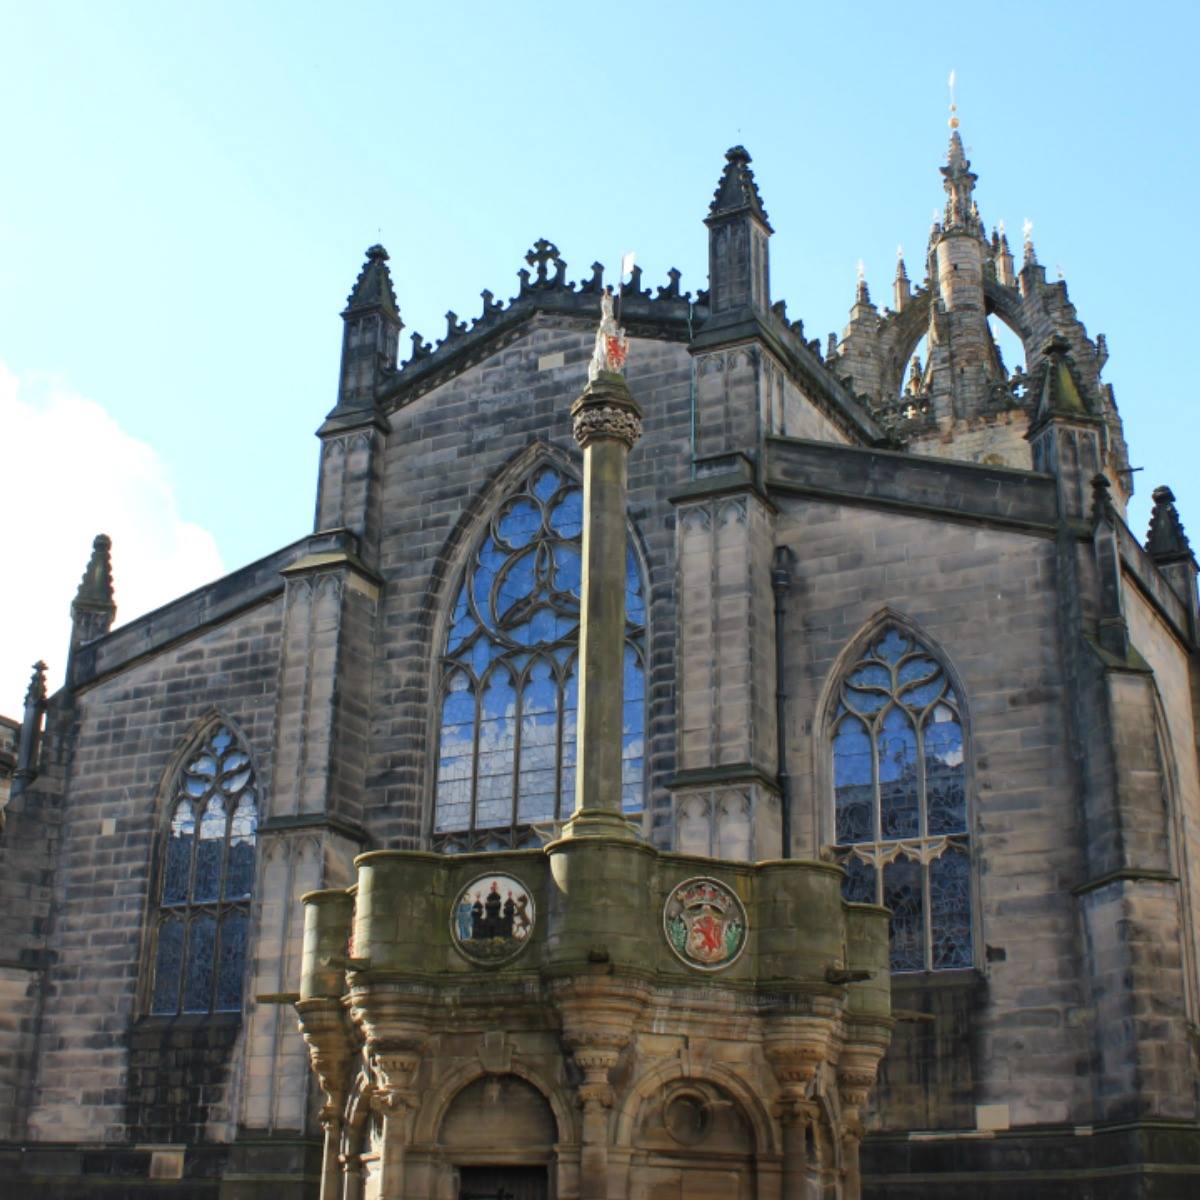 The History of St. Giles' Cathedral